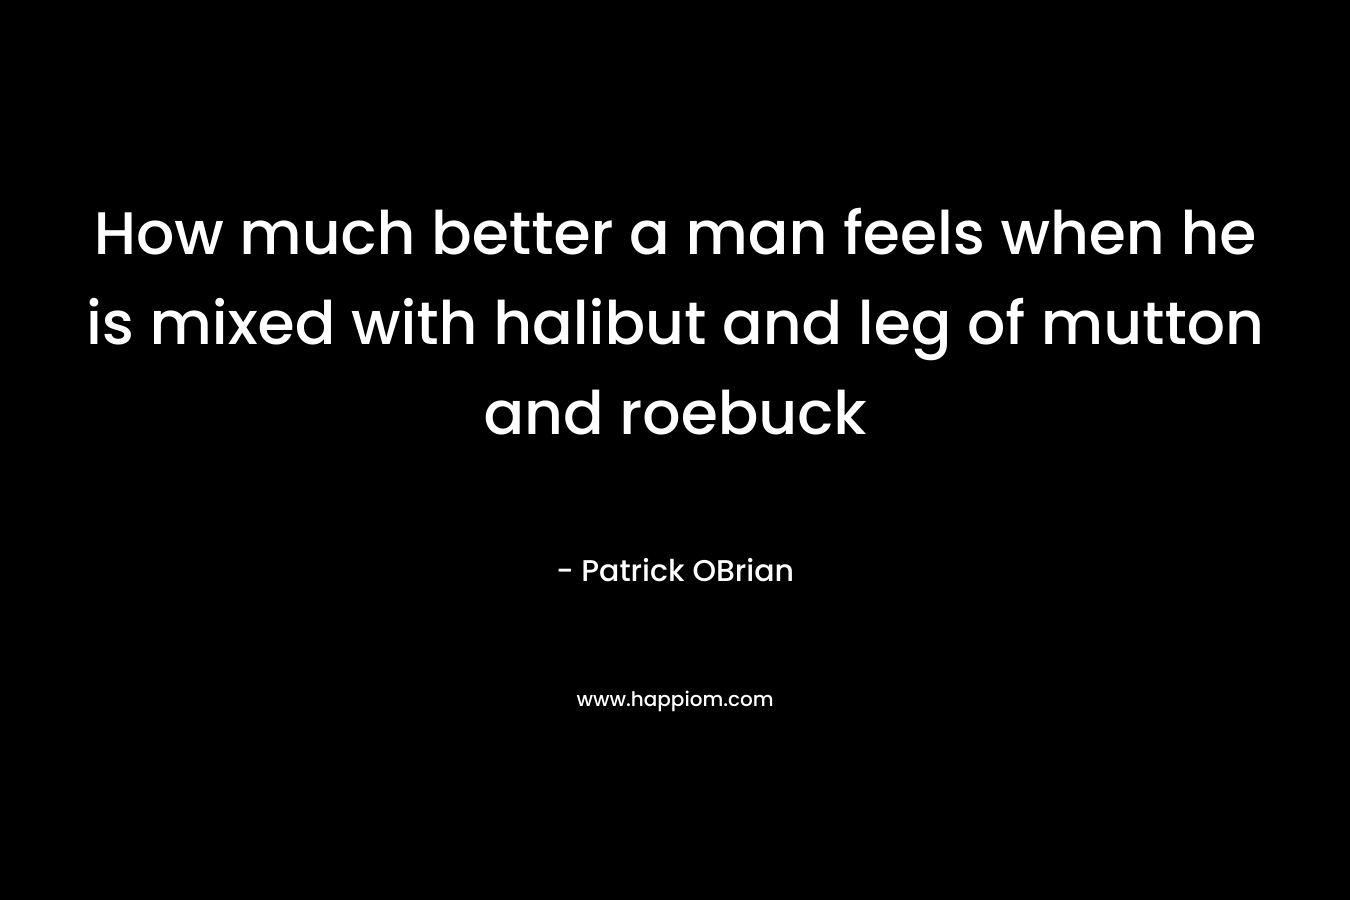 How much better a man feels when he is mixed with halibut and leg of mutton and roebuck – Patrick OBrian